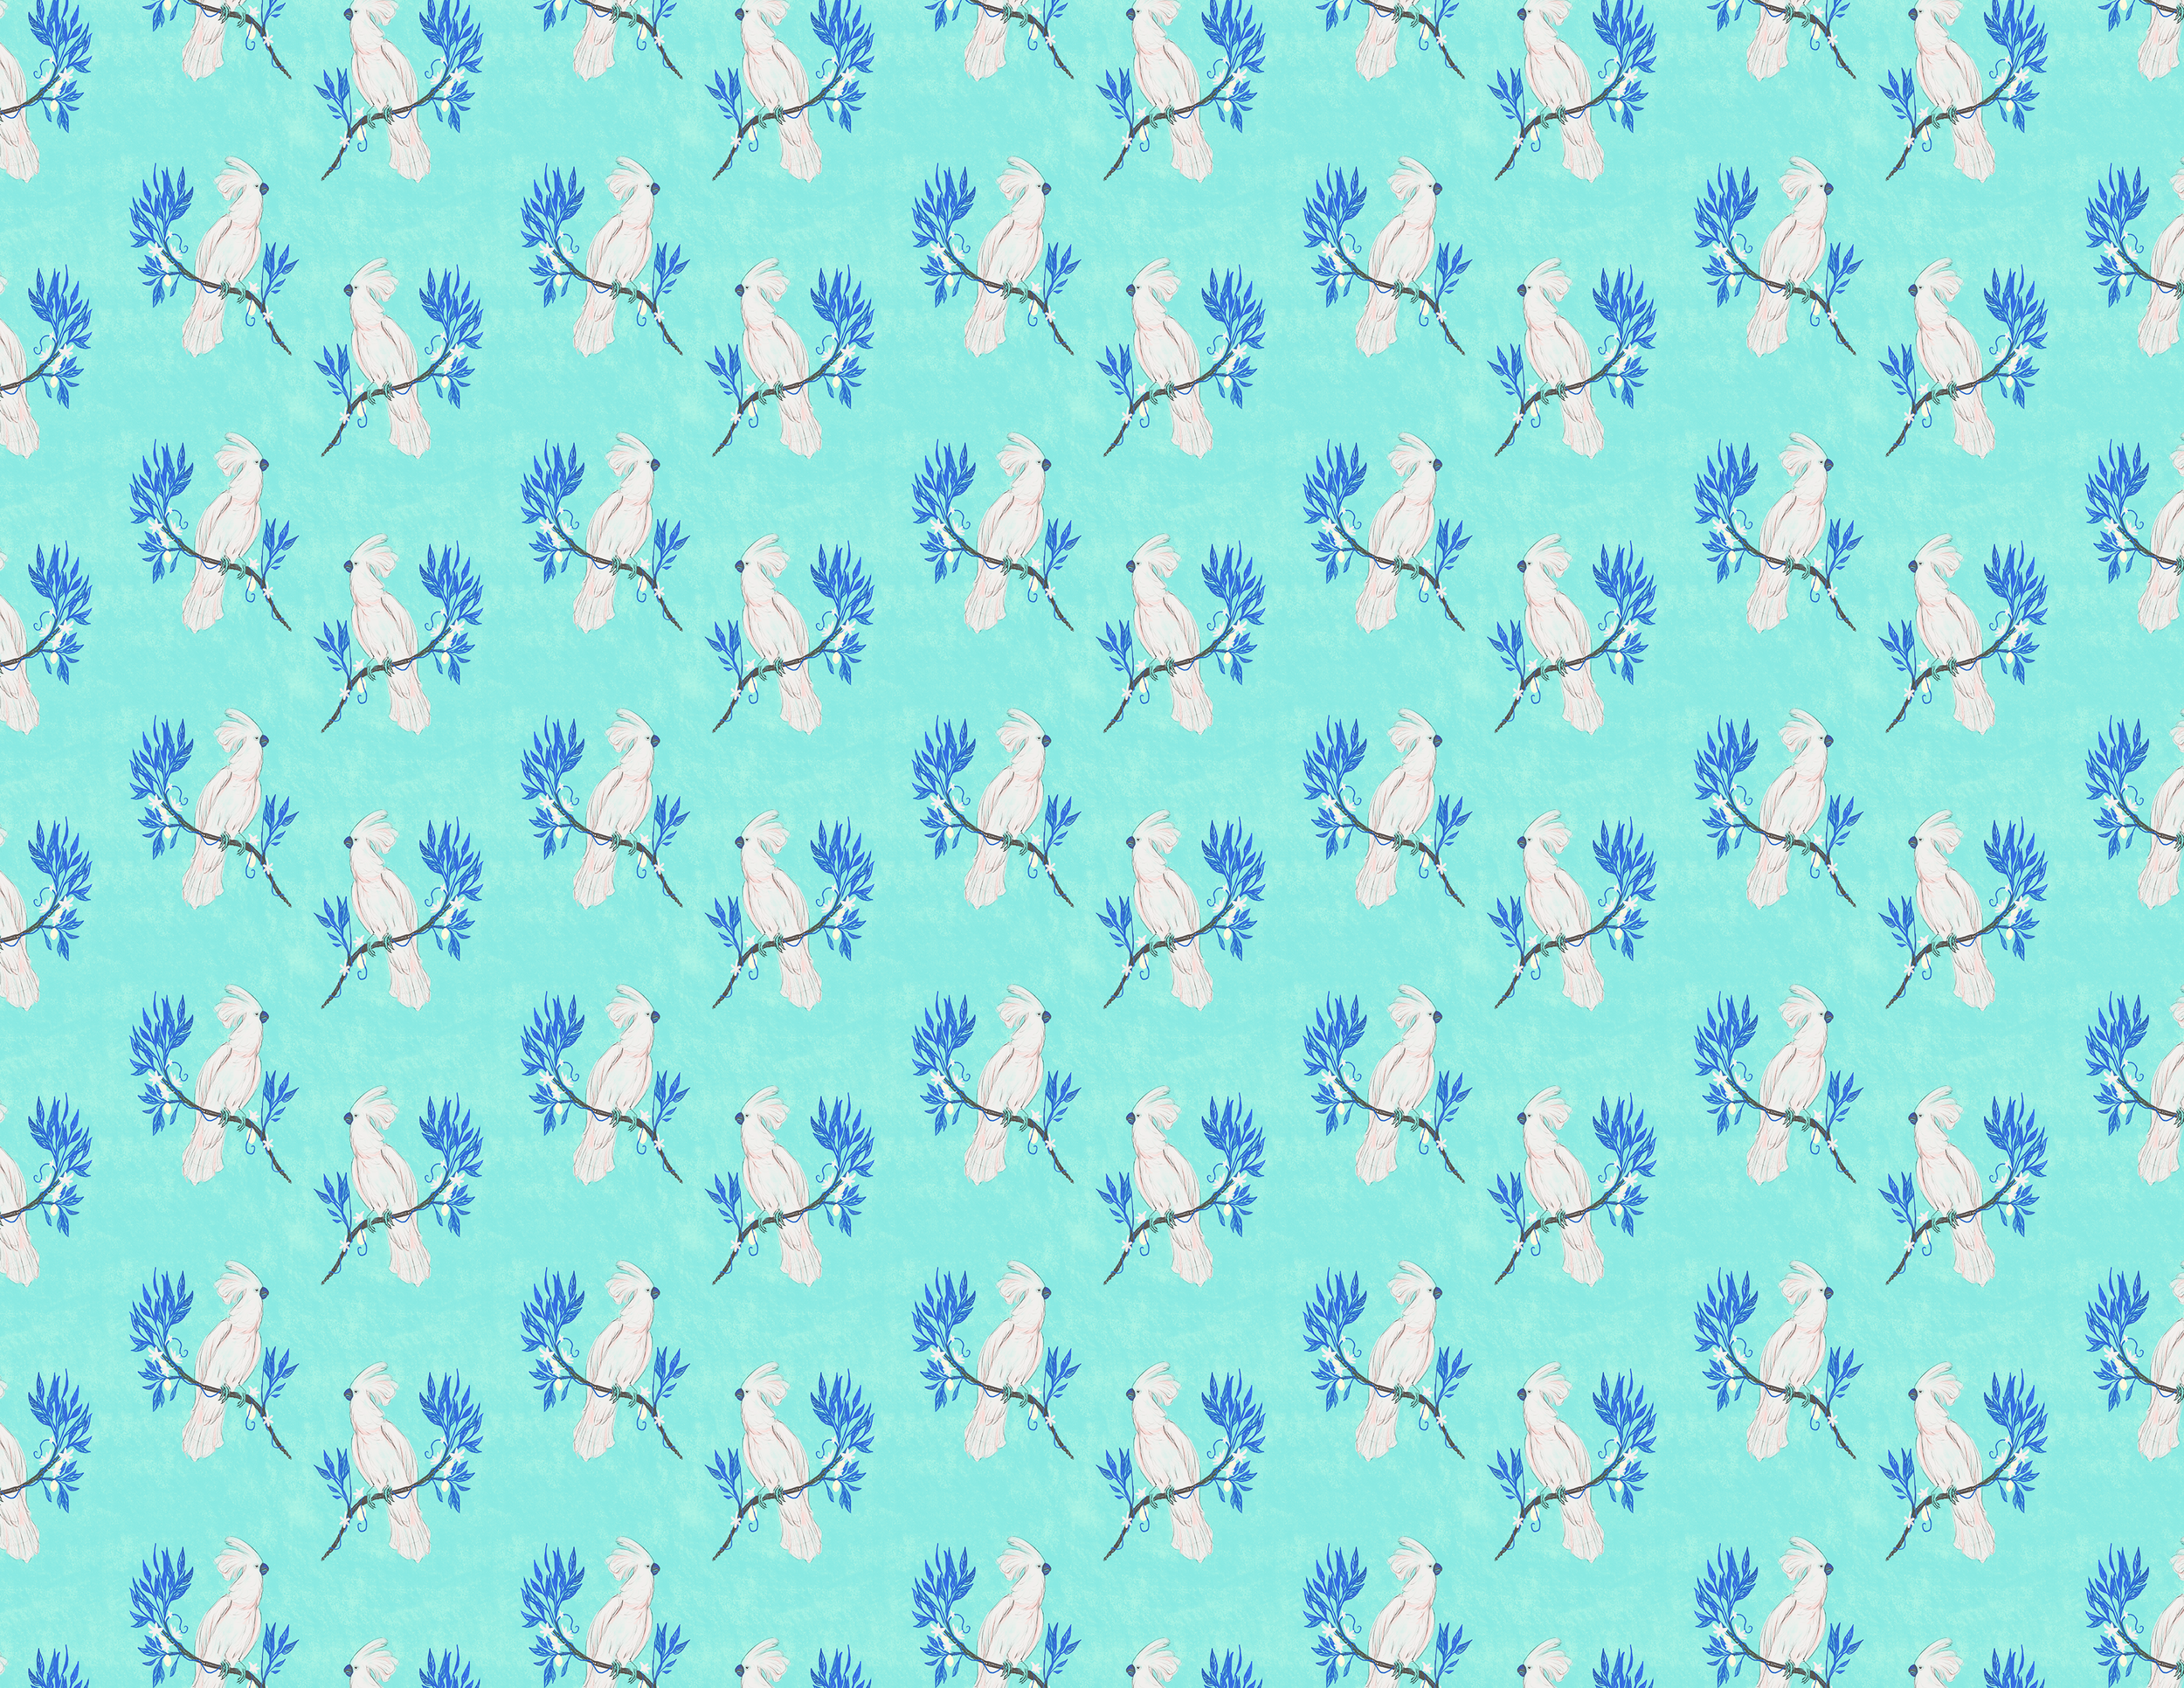 cockatoo pattern.png